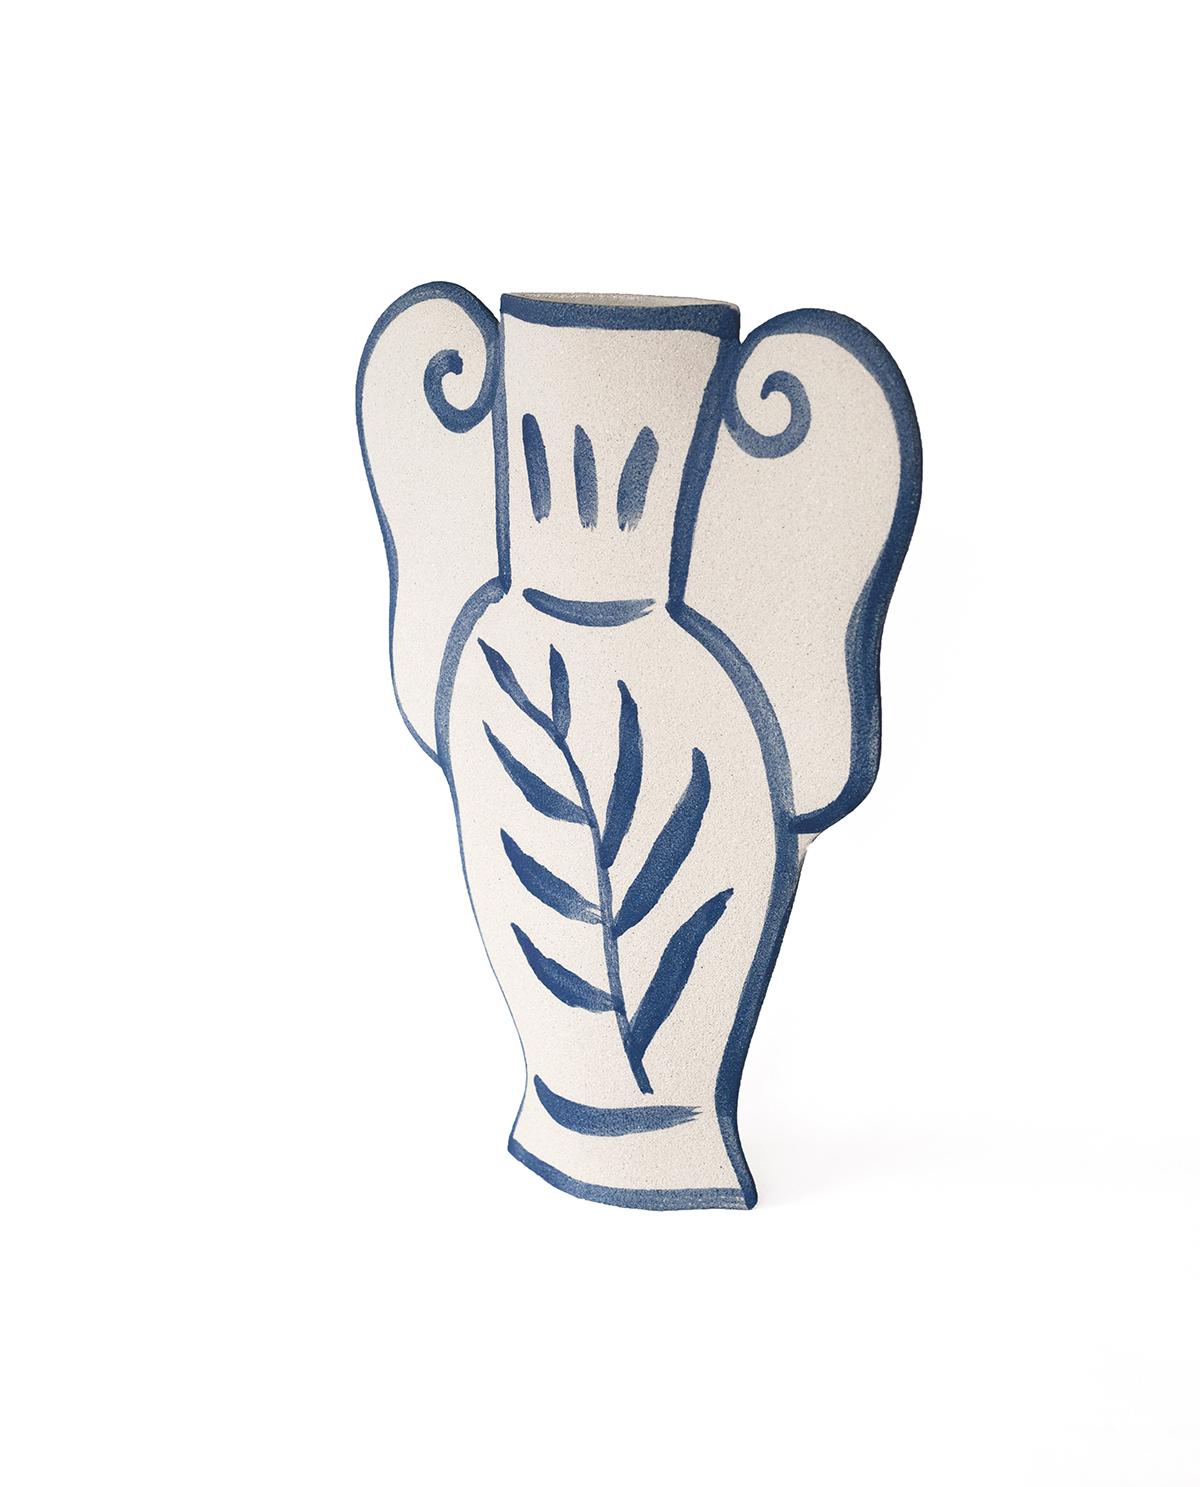 A part of a captivating new line blending ancient Greek pottery with contemporary design, the ‘Krater N°3’ vase showcases delicate blue underglaze illustrations that harmonize traditional and modern aesthetics.
Crafted by our designer, the blue